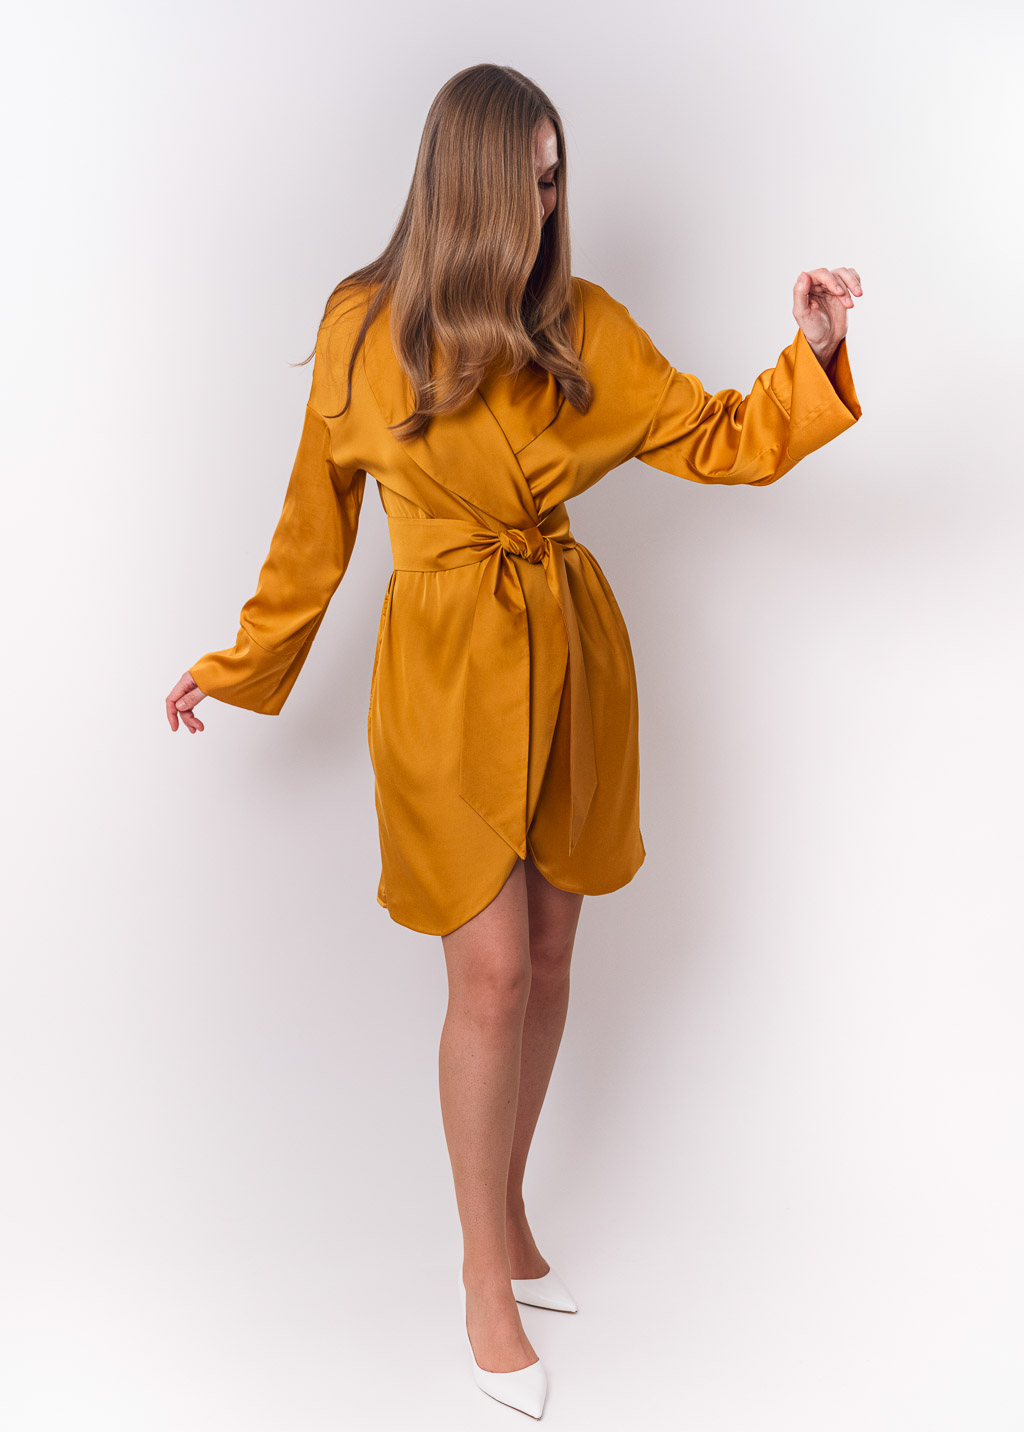 Gold silk robe with pockets